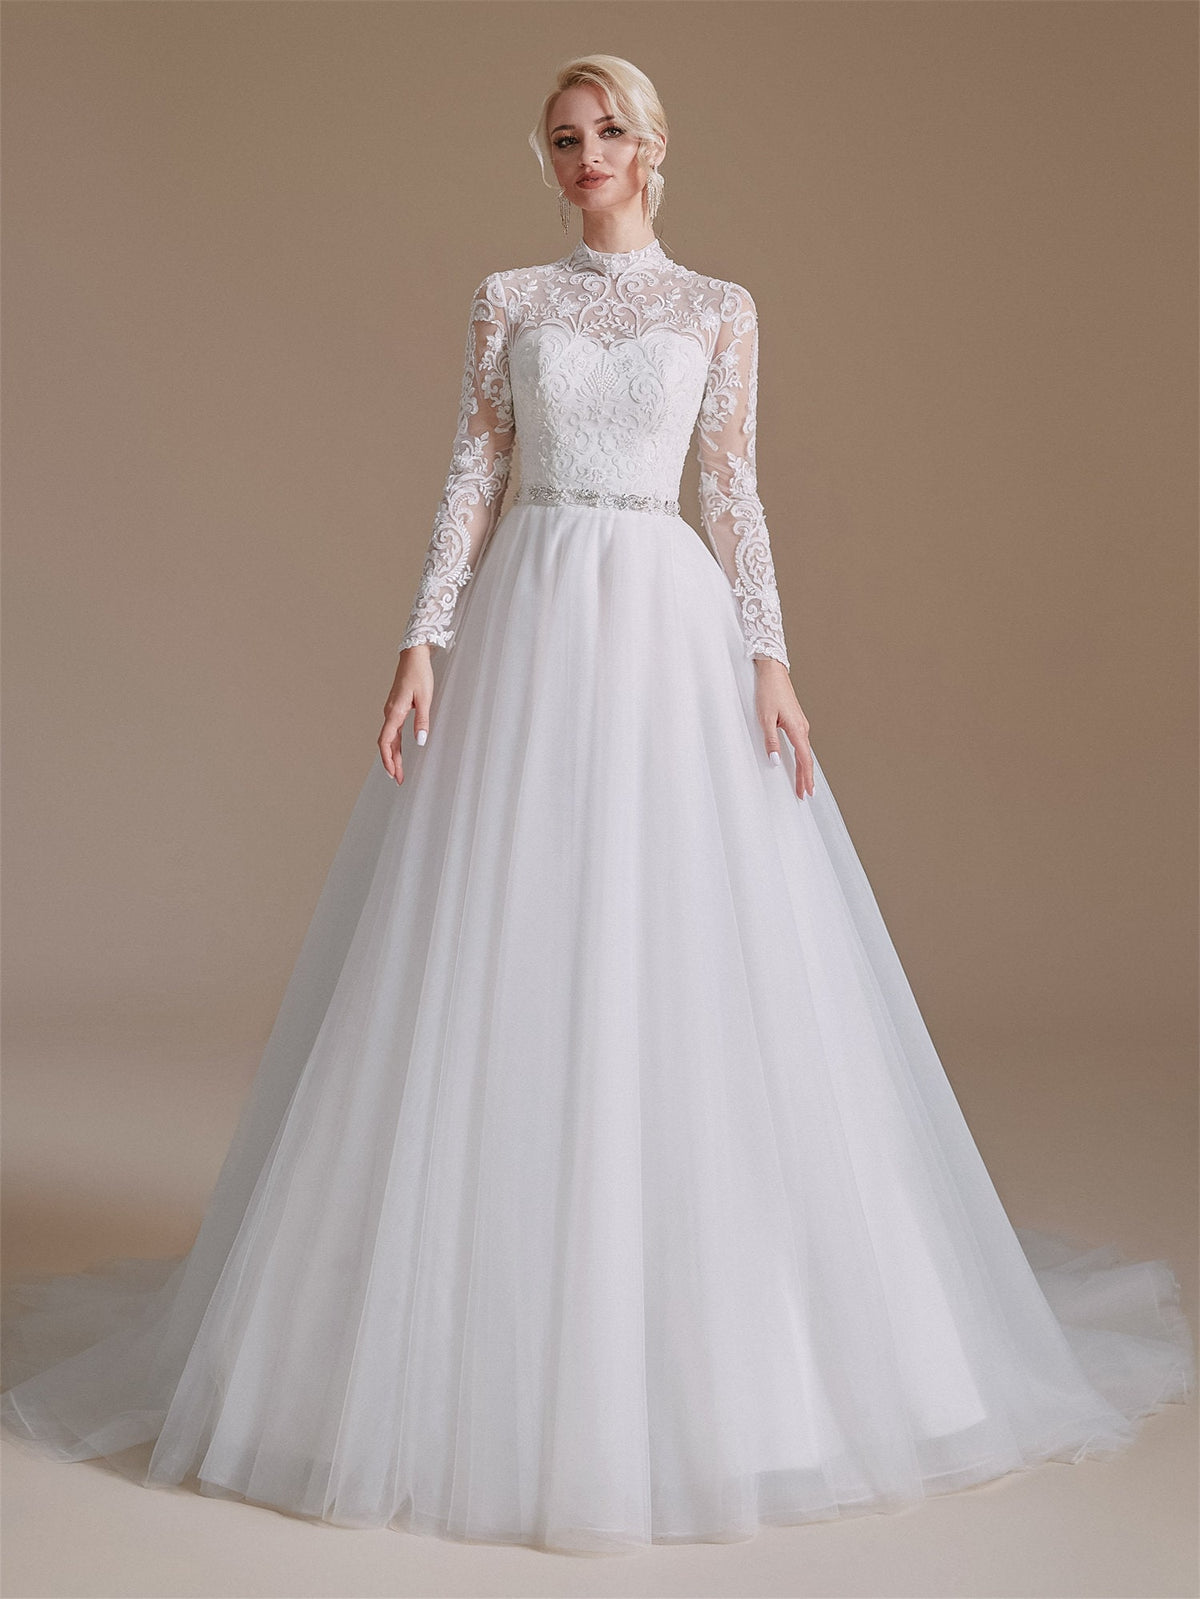 Long Sleeves High Neck Full A-Line Wedding Dress Bridal Gown Vintage Style with Tulle Train Buttons